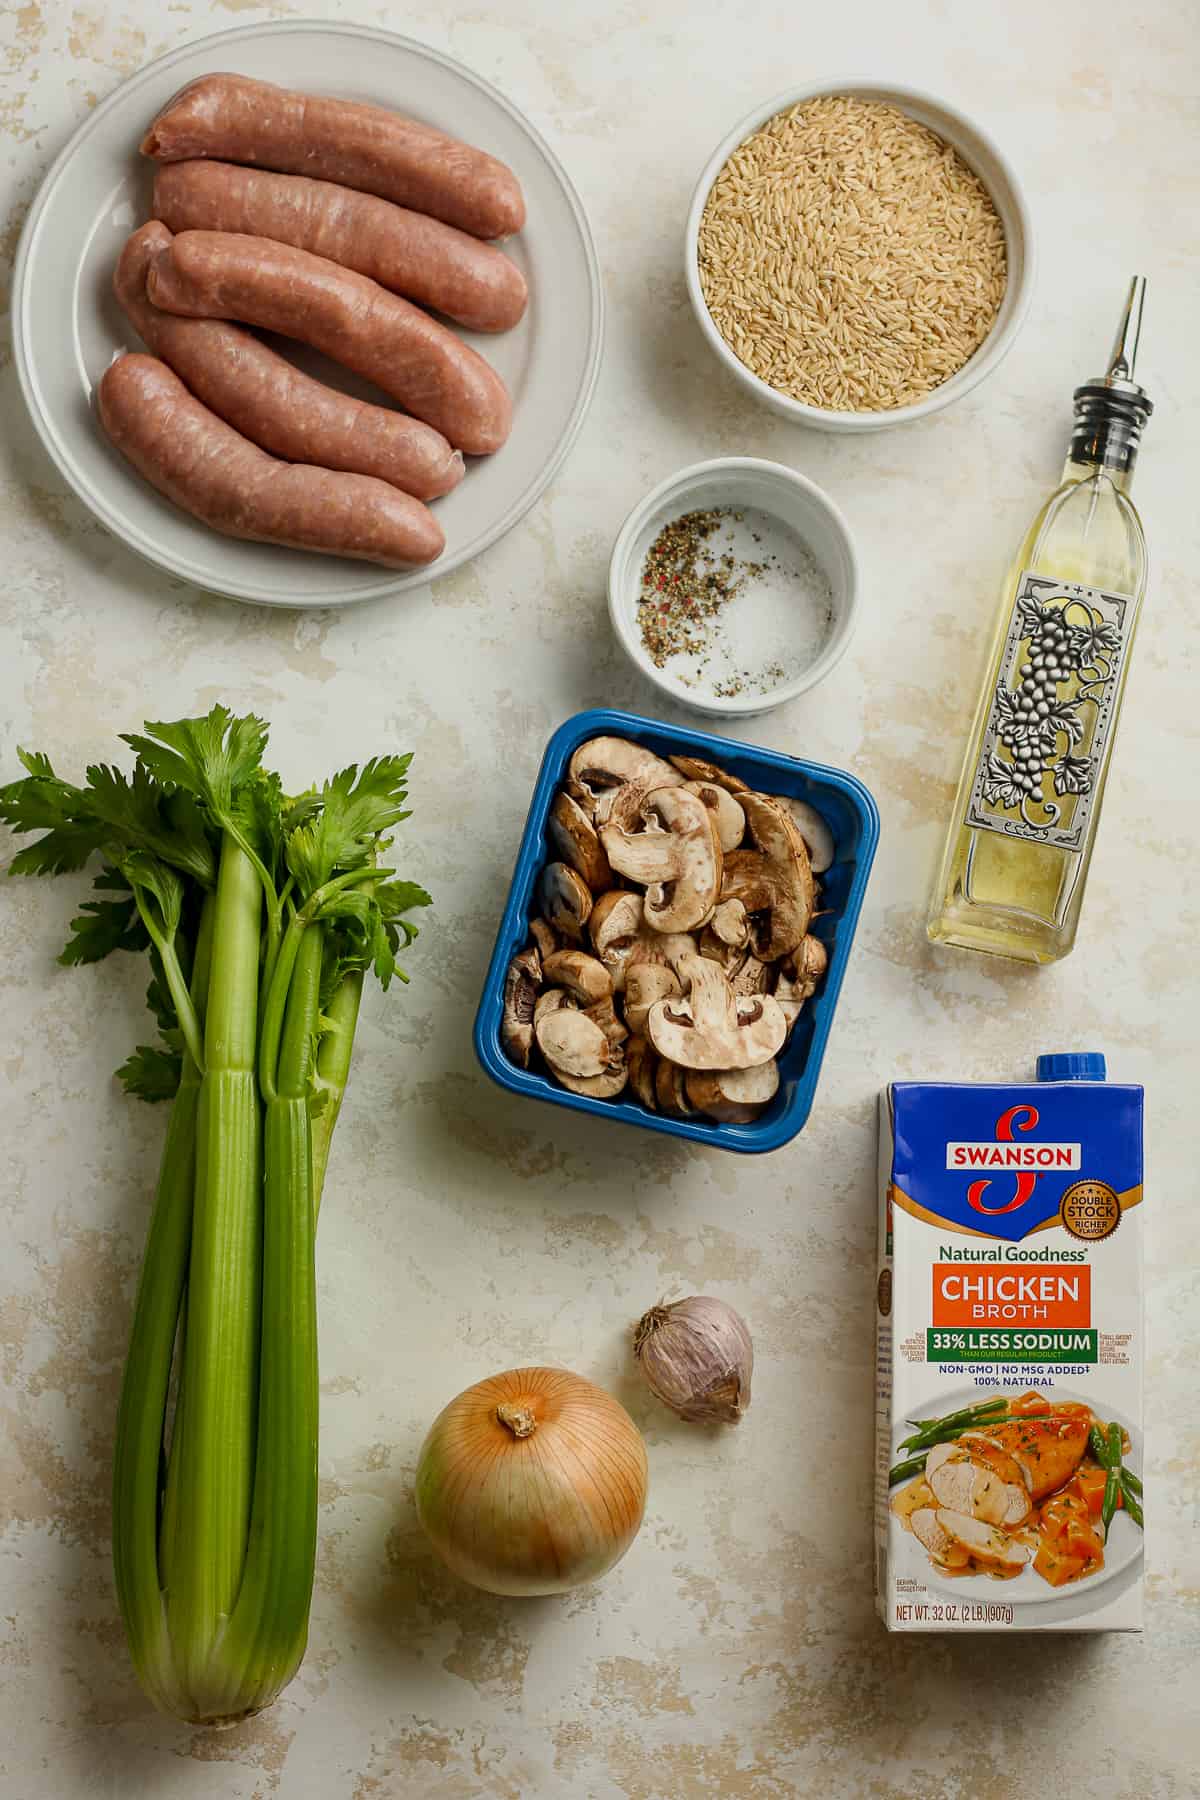 The ingredients for the rice dressing.